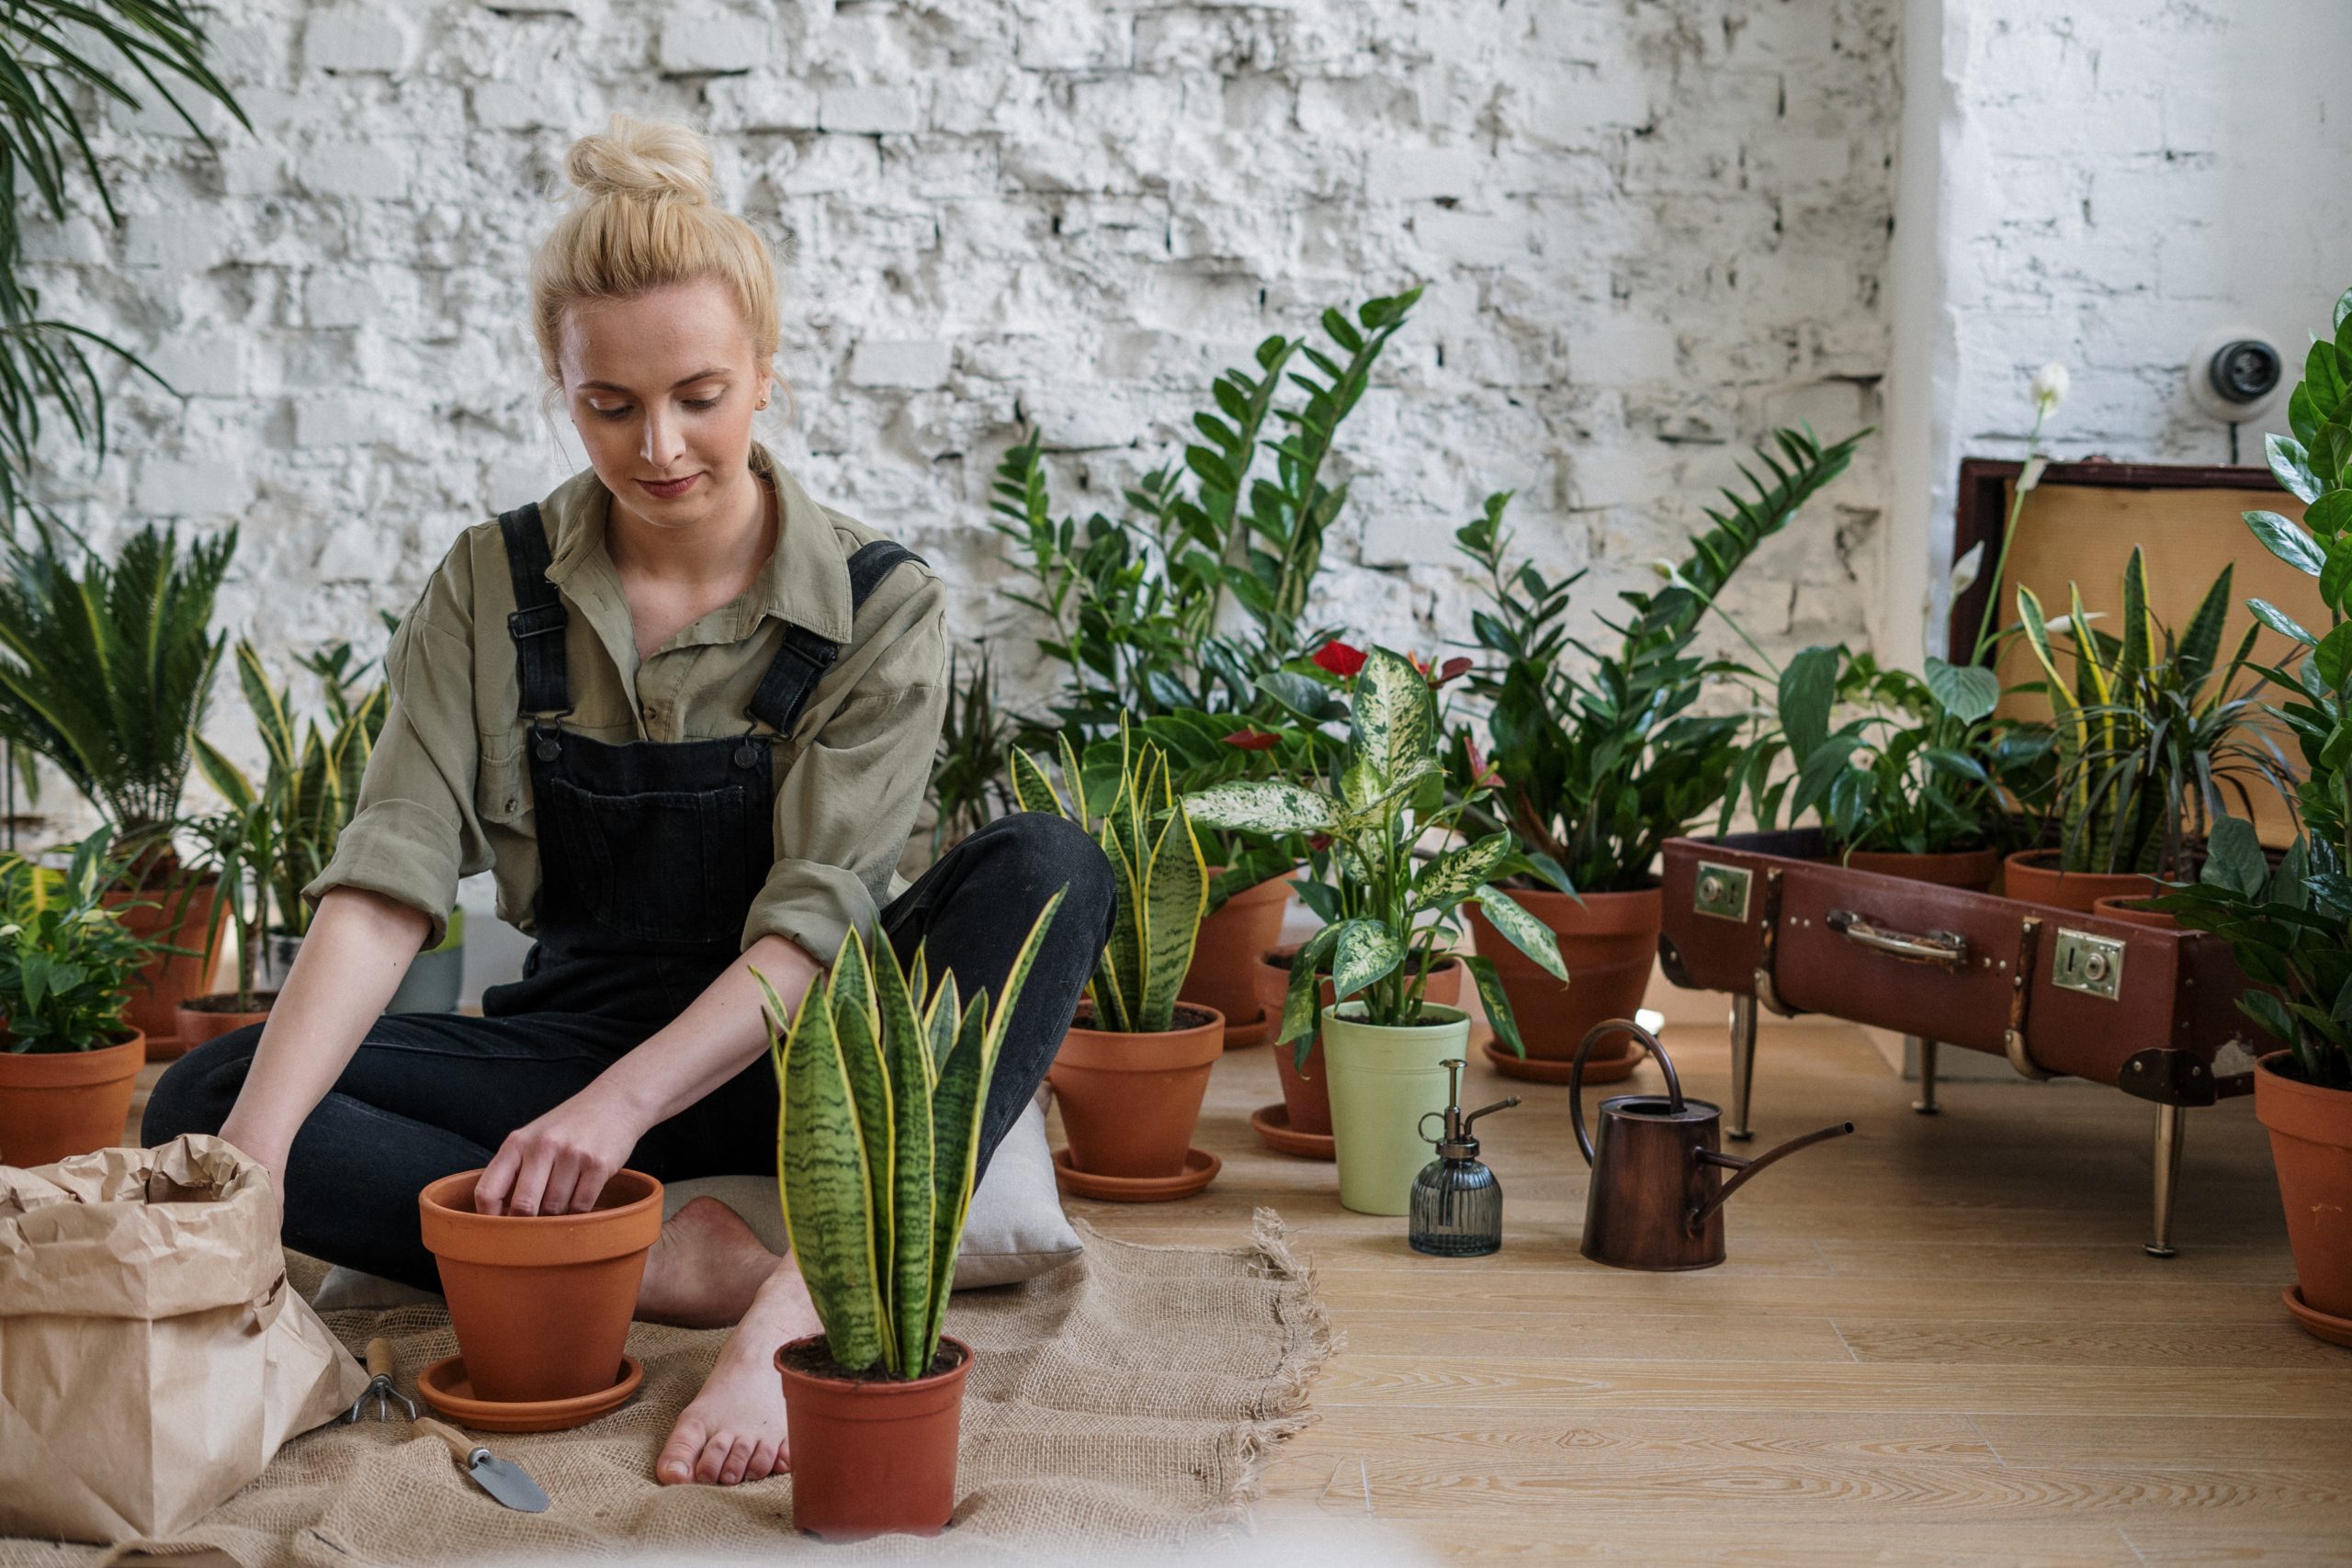 A woman cares for her extensive range of houseplants for a post about keeping houseplants healthy.